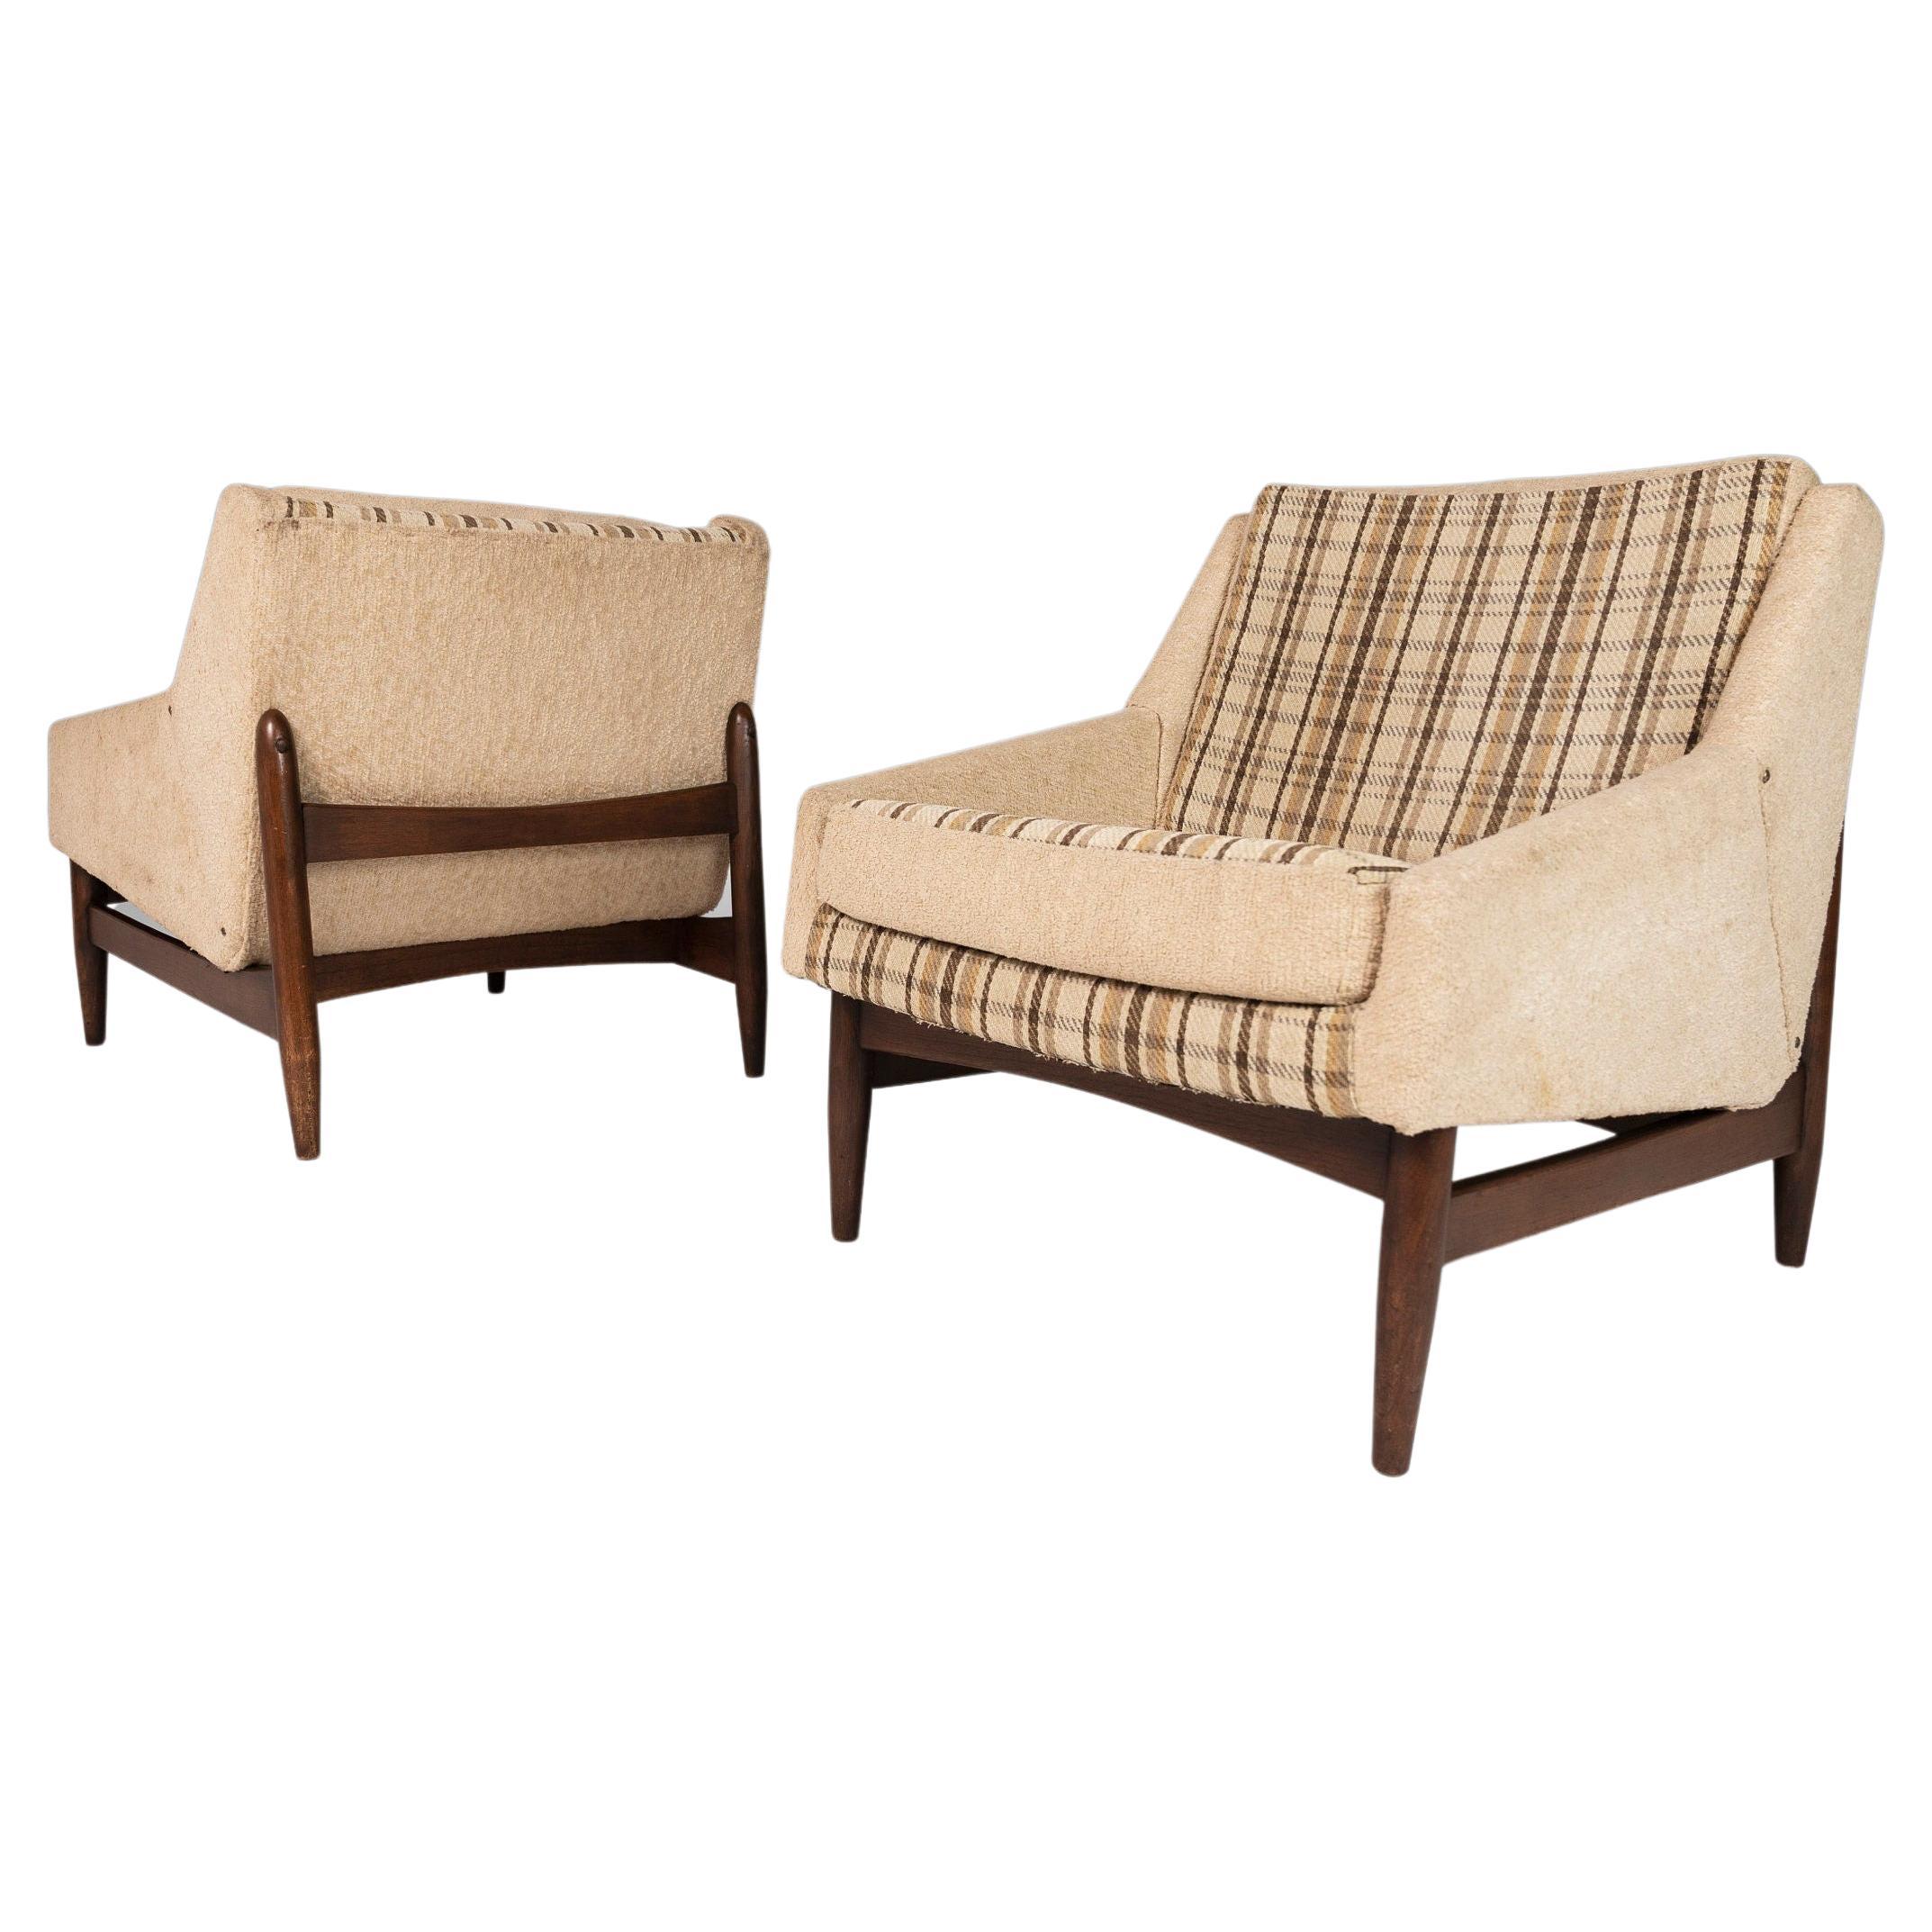 Set of Two (2) Danish Modern Floating Lounge Chairs on Walnut Frames, 1960's